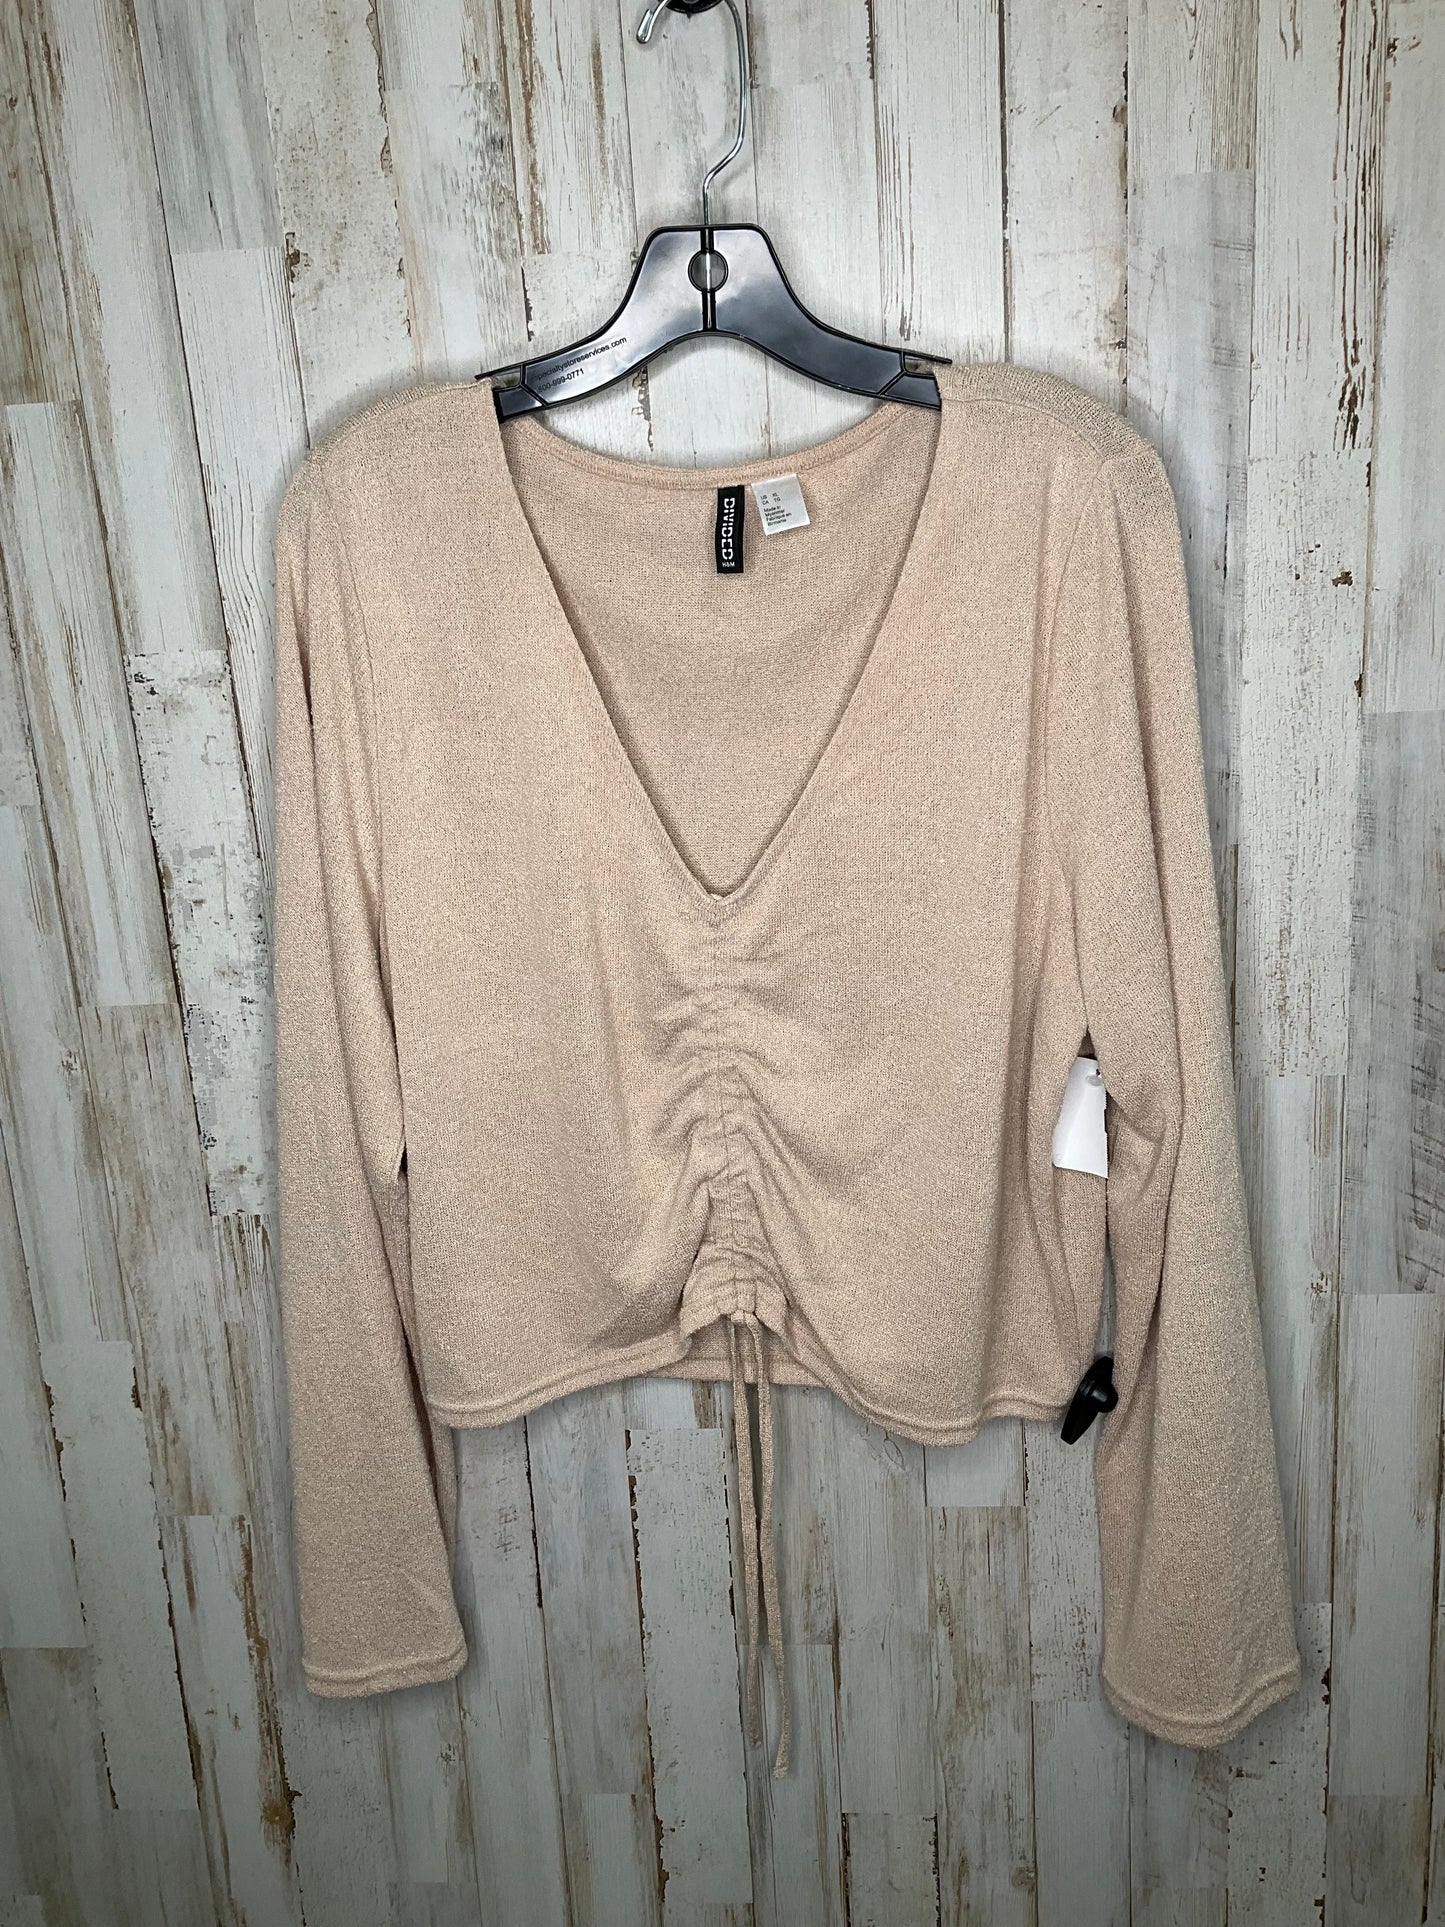 Beige Top Long Sleeve Divided, Size Xl